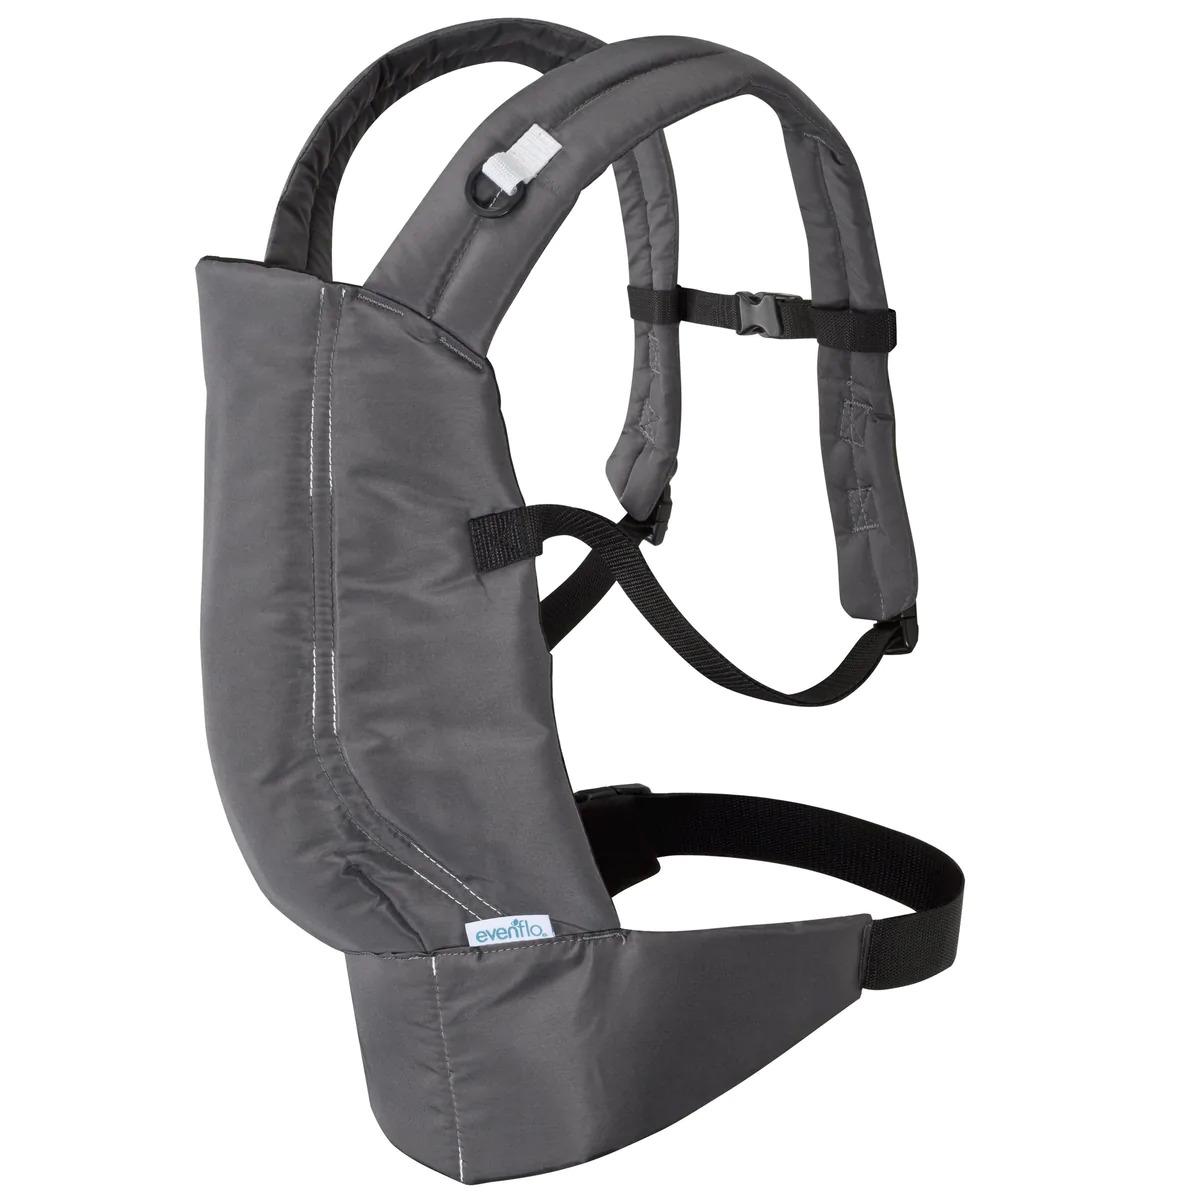 Evenflo Natural Fit Baby Carrier for $15.20 Shipped